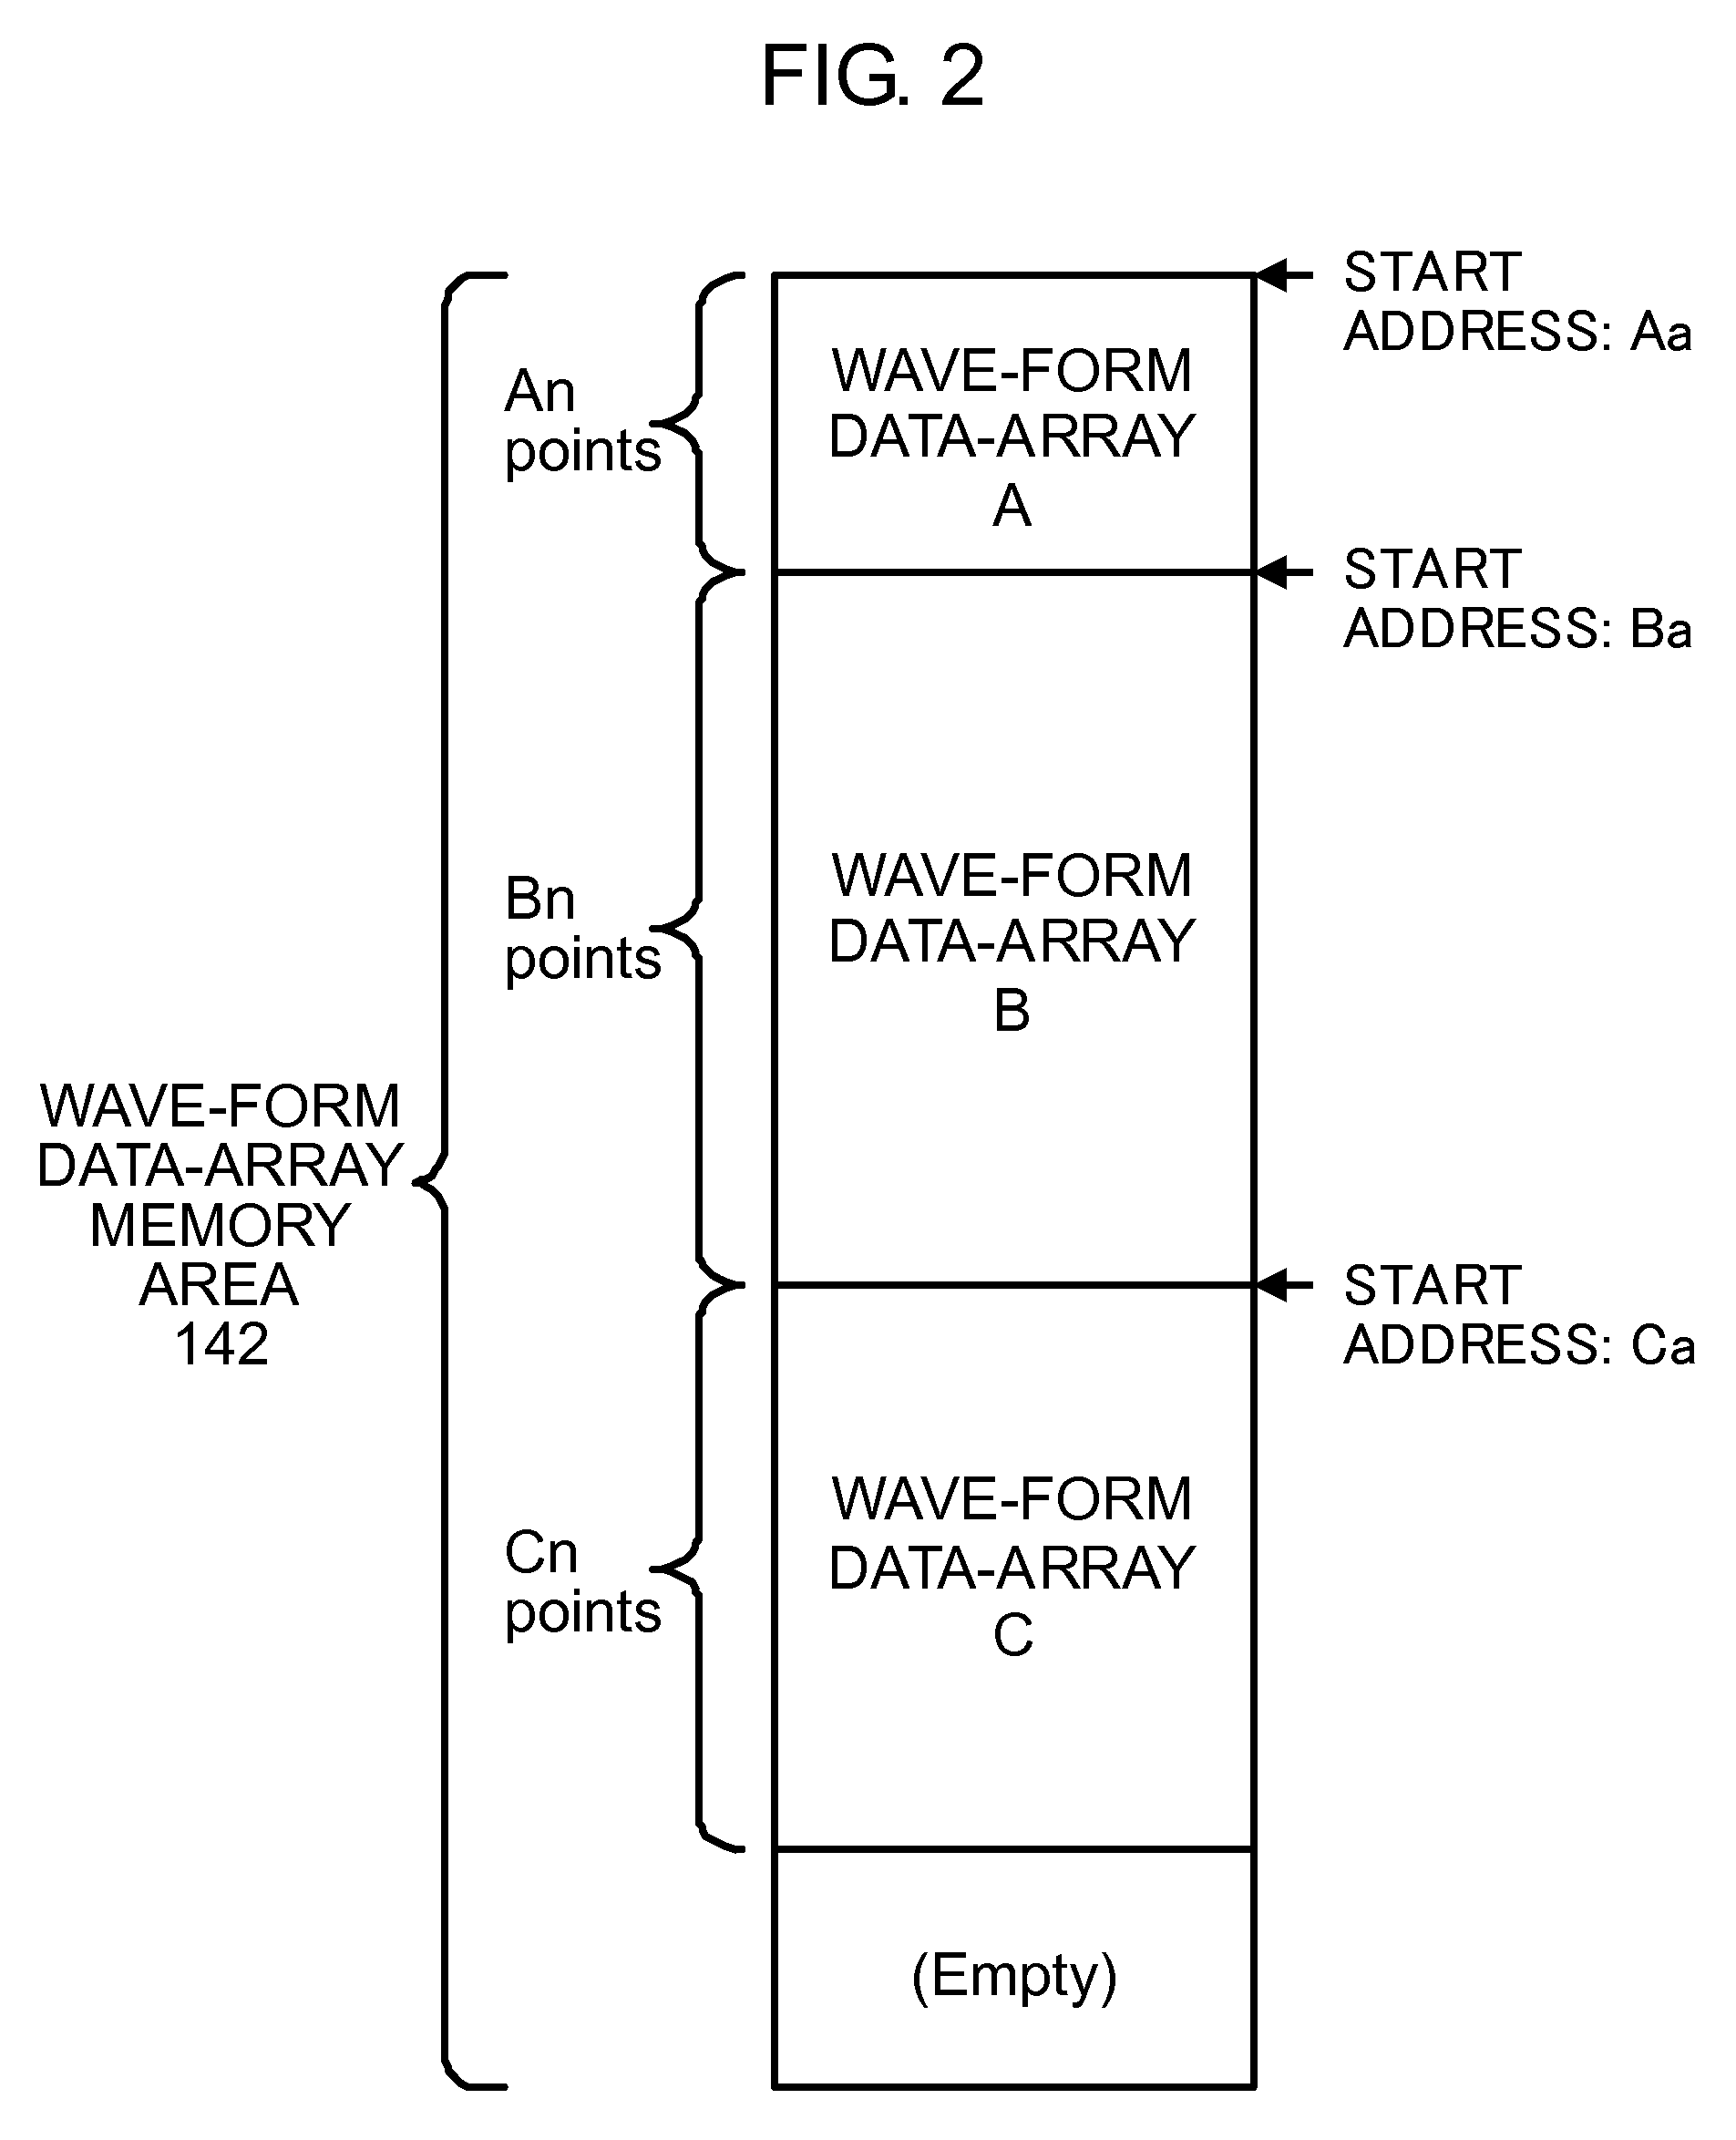 D/A converter, peripheral device, and PLC